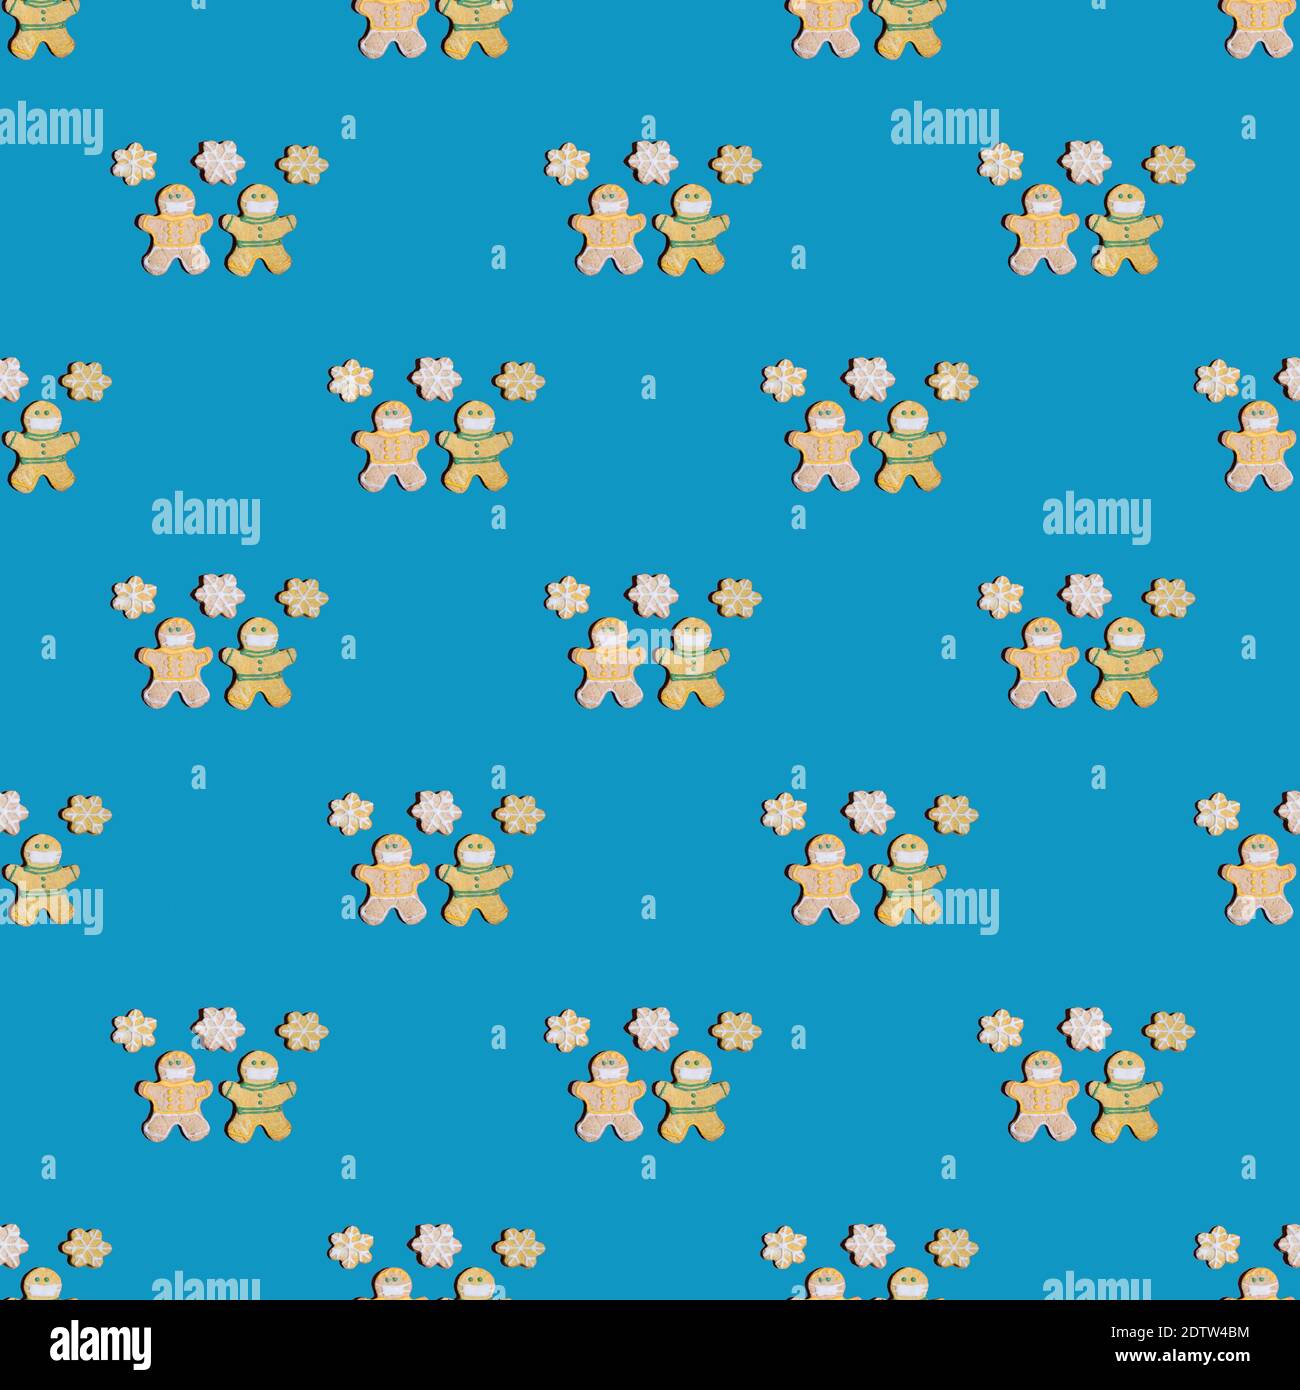 Seamless pattern with people in protective masks with snowflakes on a blue background. Stock Photo